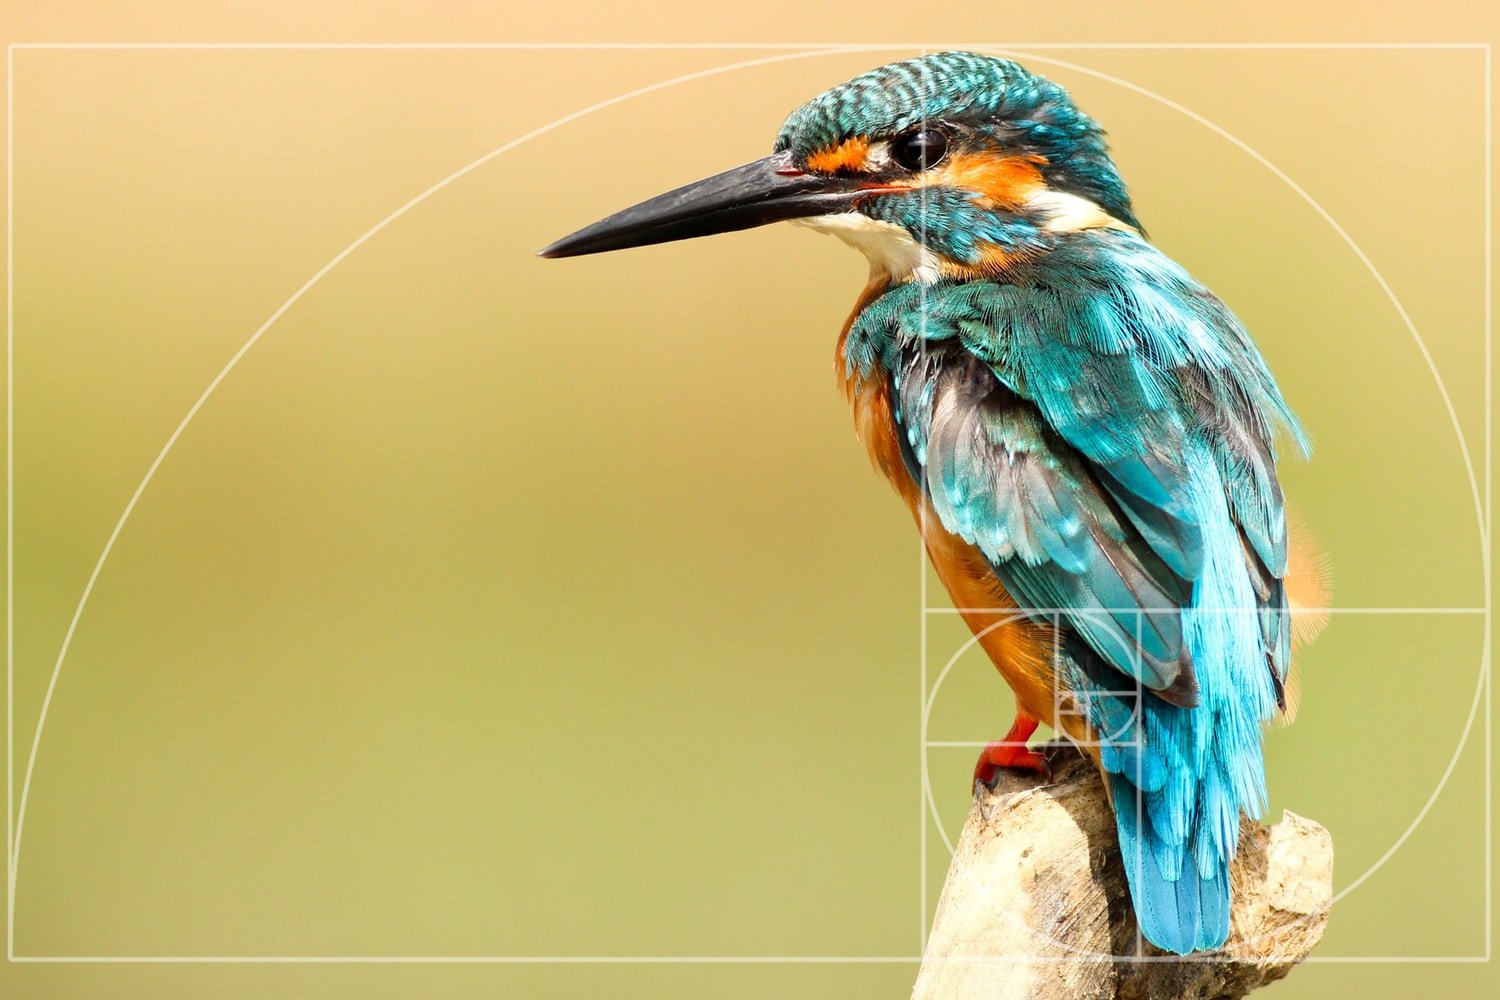 Fibonacci Sequence - 10 Top Photography Composition Rules